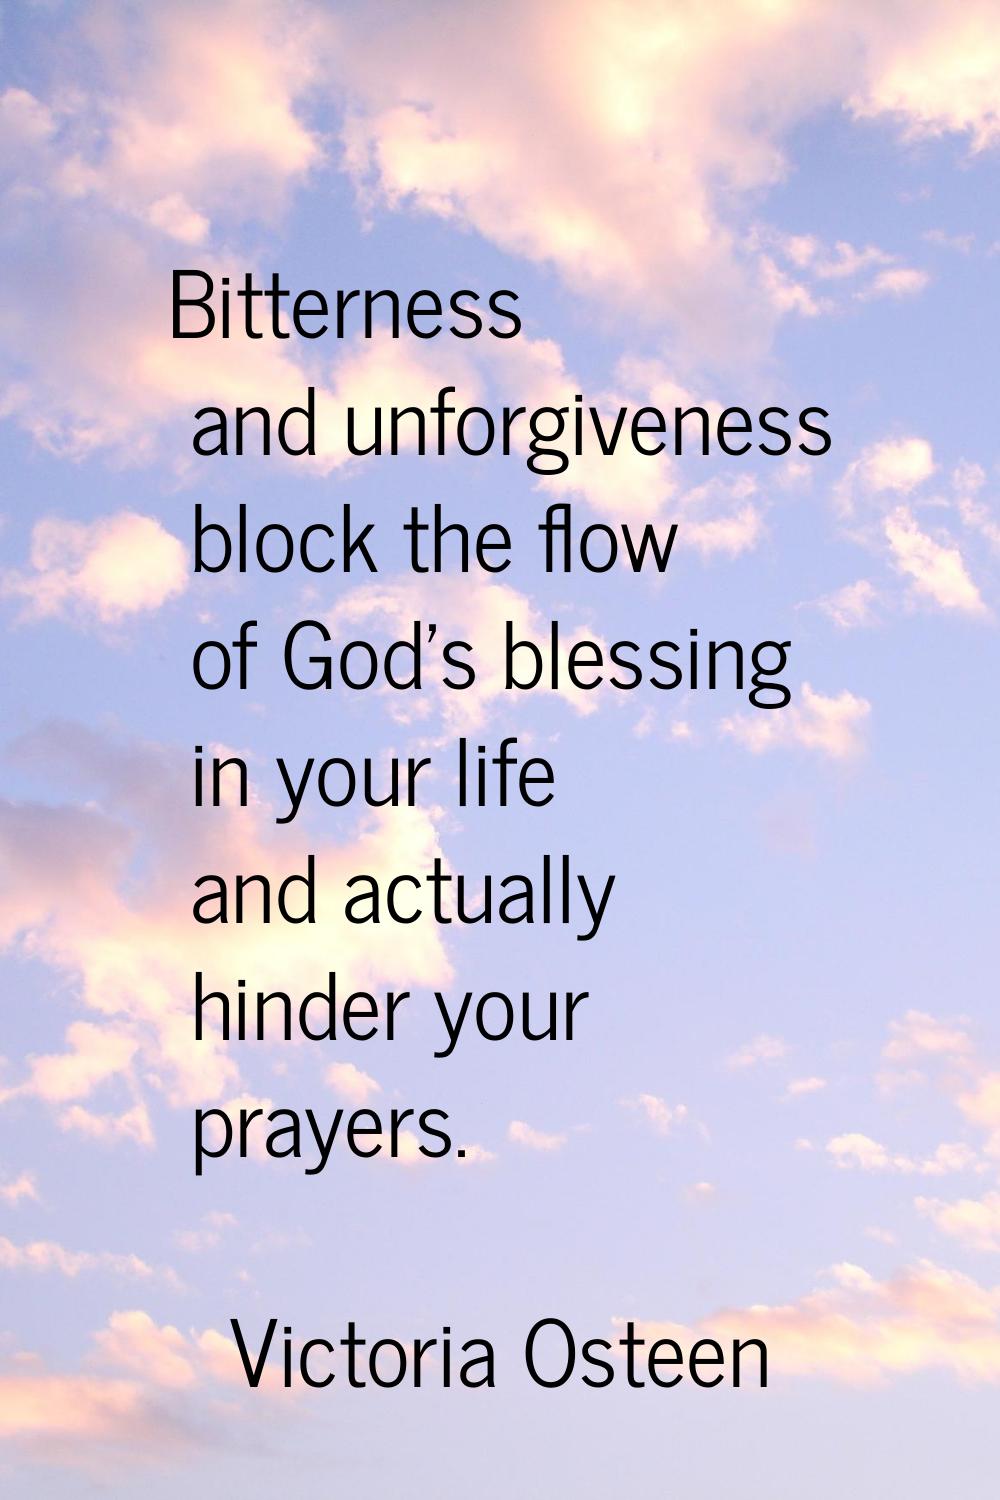 Bitterness and unforgiveness block the flow of God's blessing in your life and actually hinder your